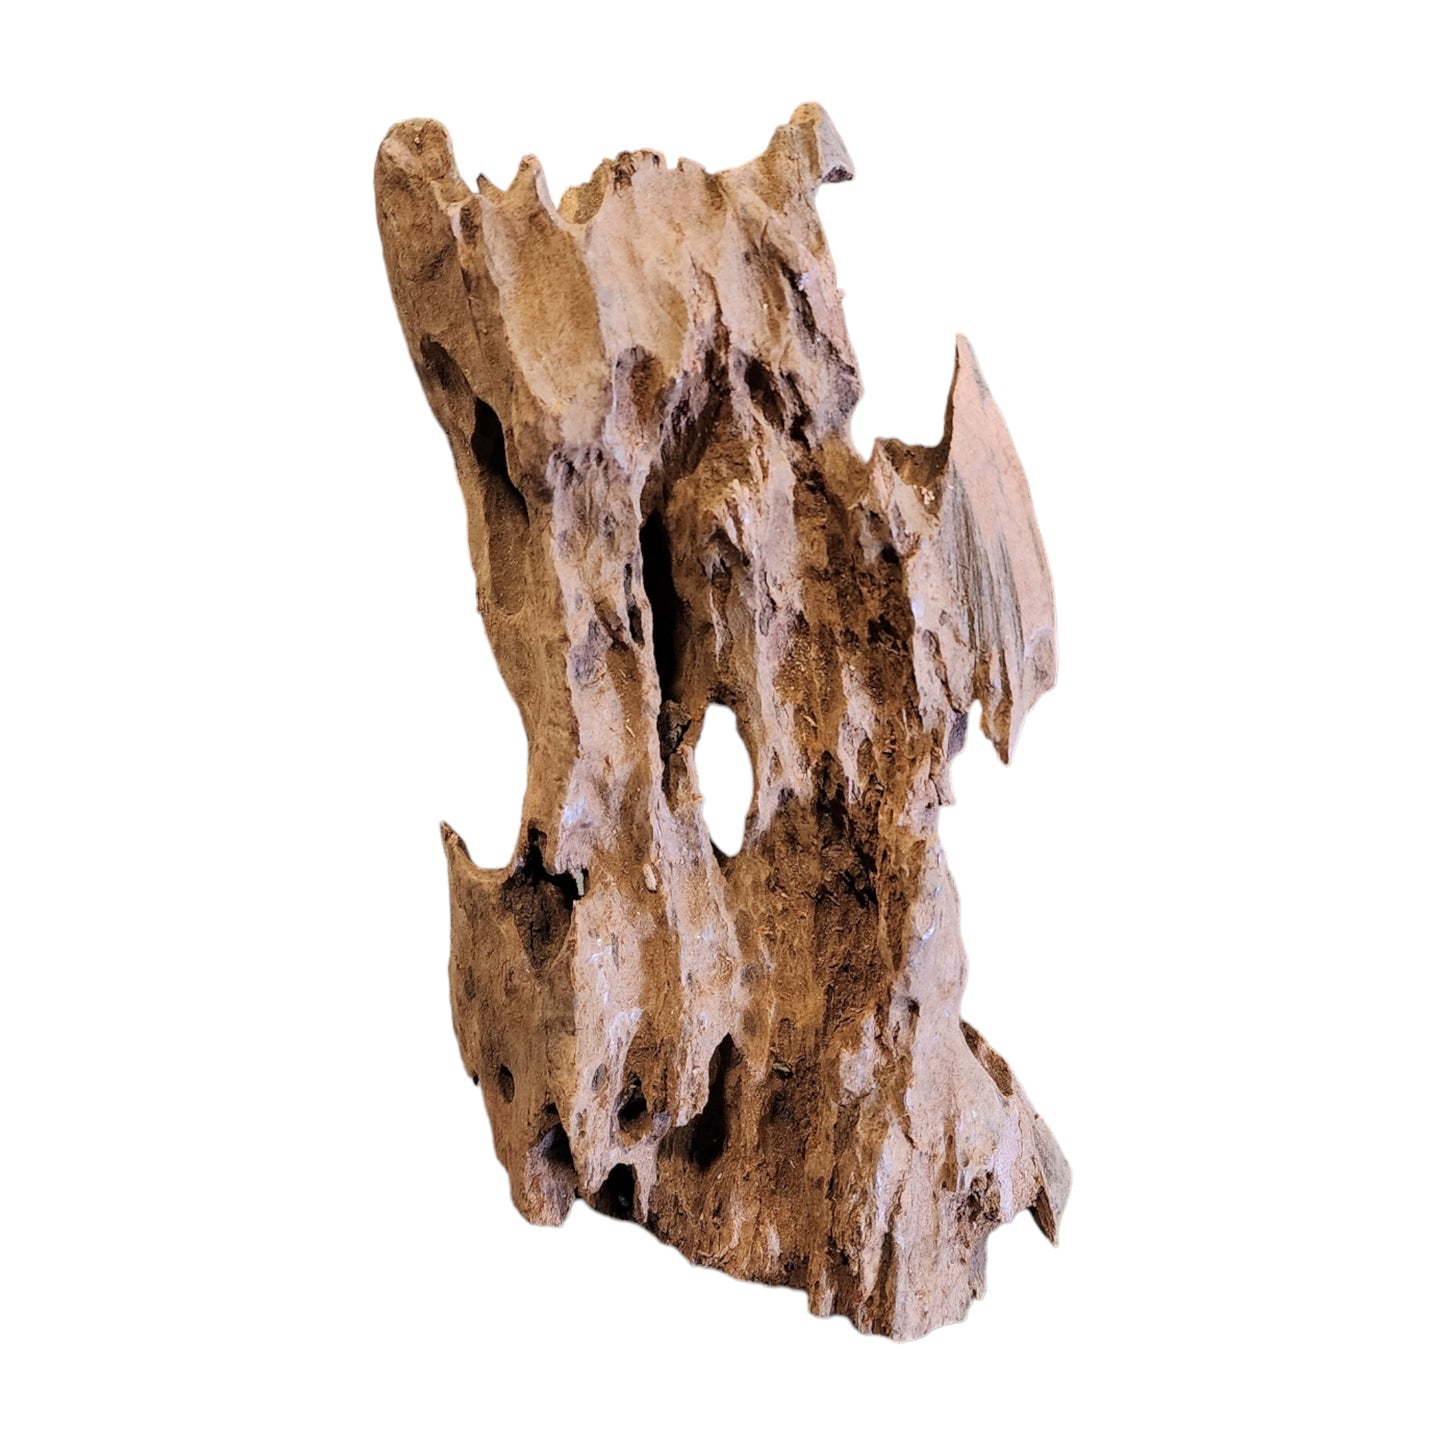 5 to 6 inch - TEXTURE DRIFTWOOD - XS <15cm - Indonesia - NEW923 - #1